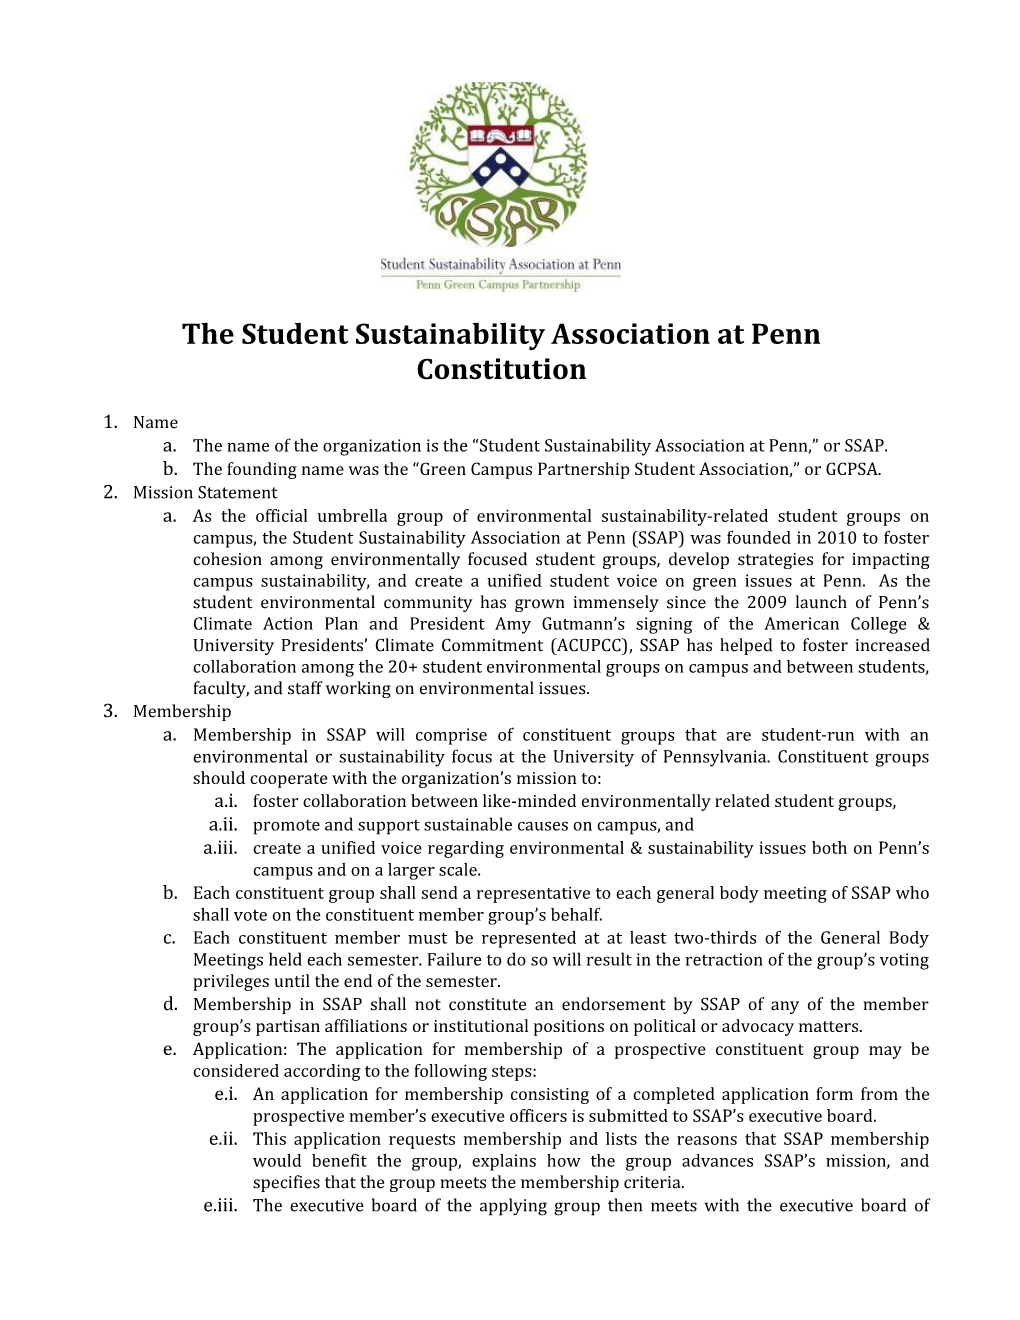 The Student Sustainability Association at Penn